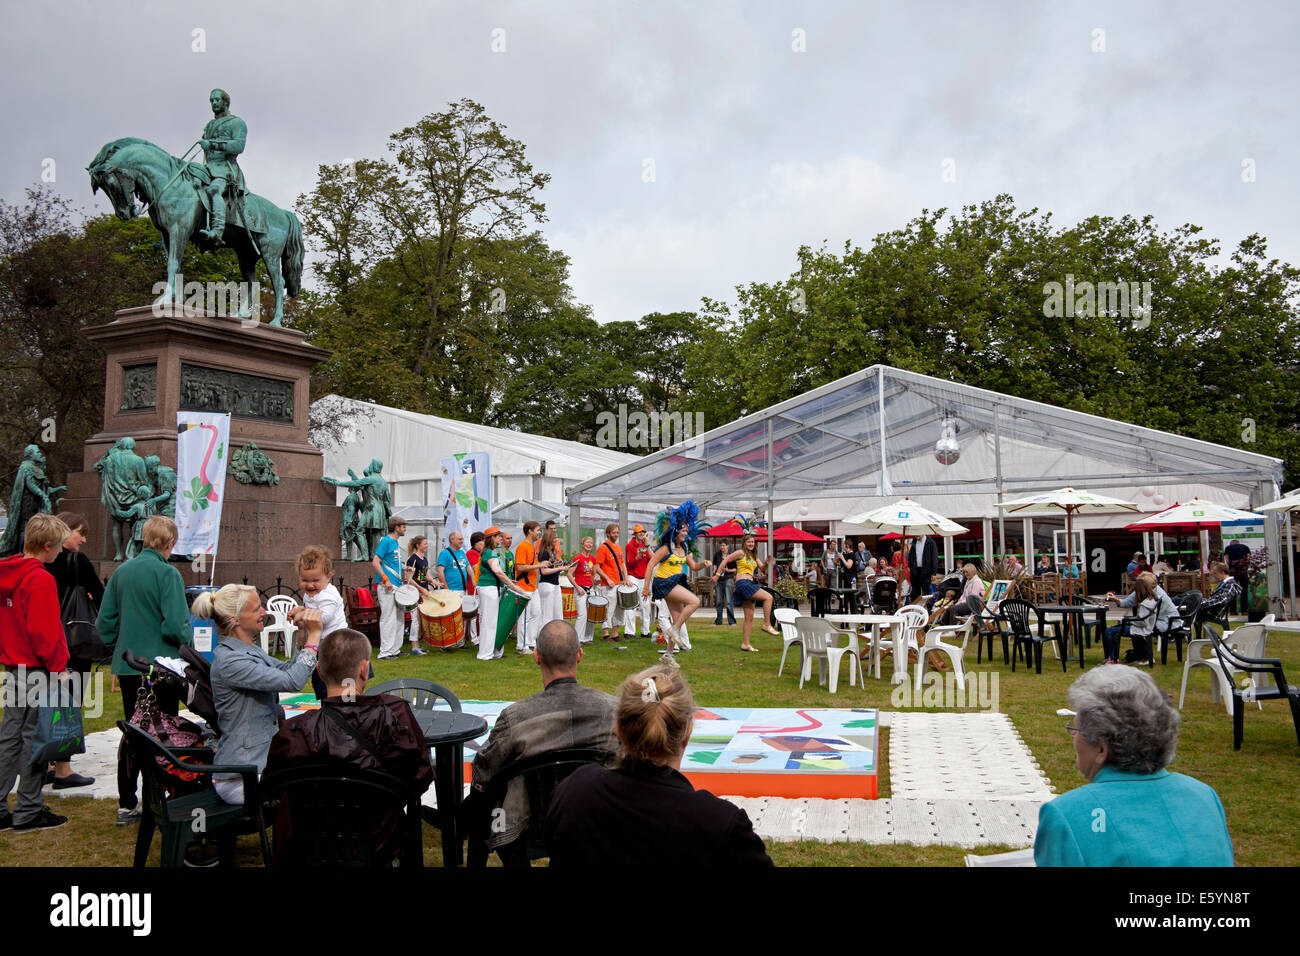 Edinburgh, Scotland, UK, 9th August 2014, opening day of Edinburgh Book Festival, Charlotte Square. Visitors relax in the gardens while watching Edinburgh Samba Band and view the map to find their way around the festival. Stock Photo